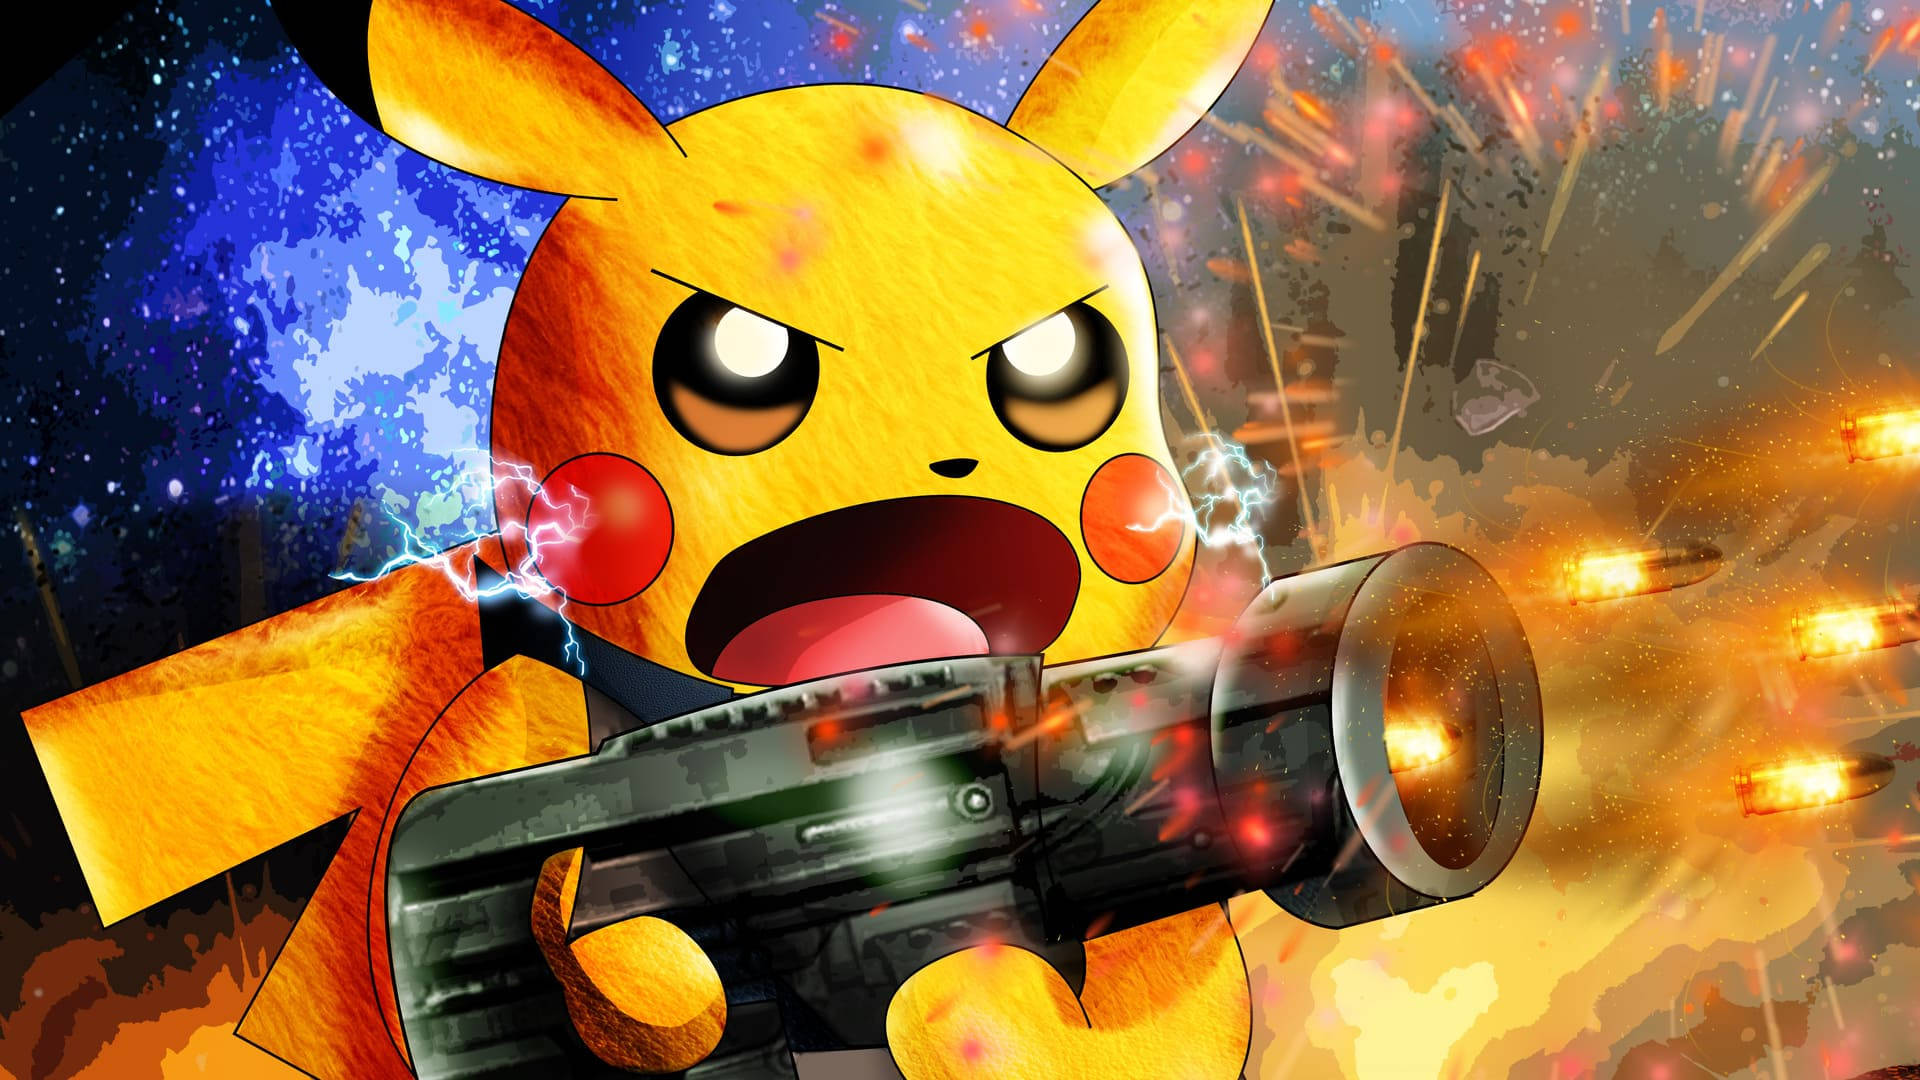 Angry Pikachu With Gun Cool Pokemon Background